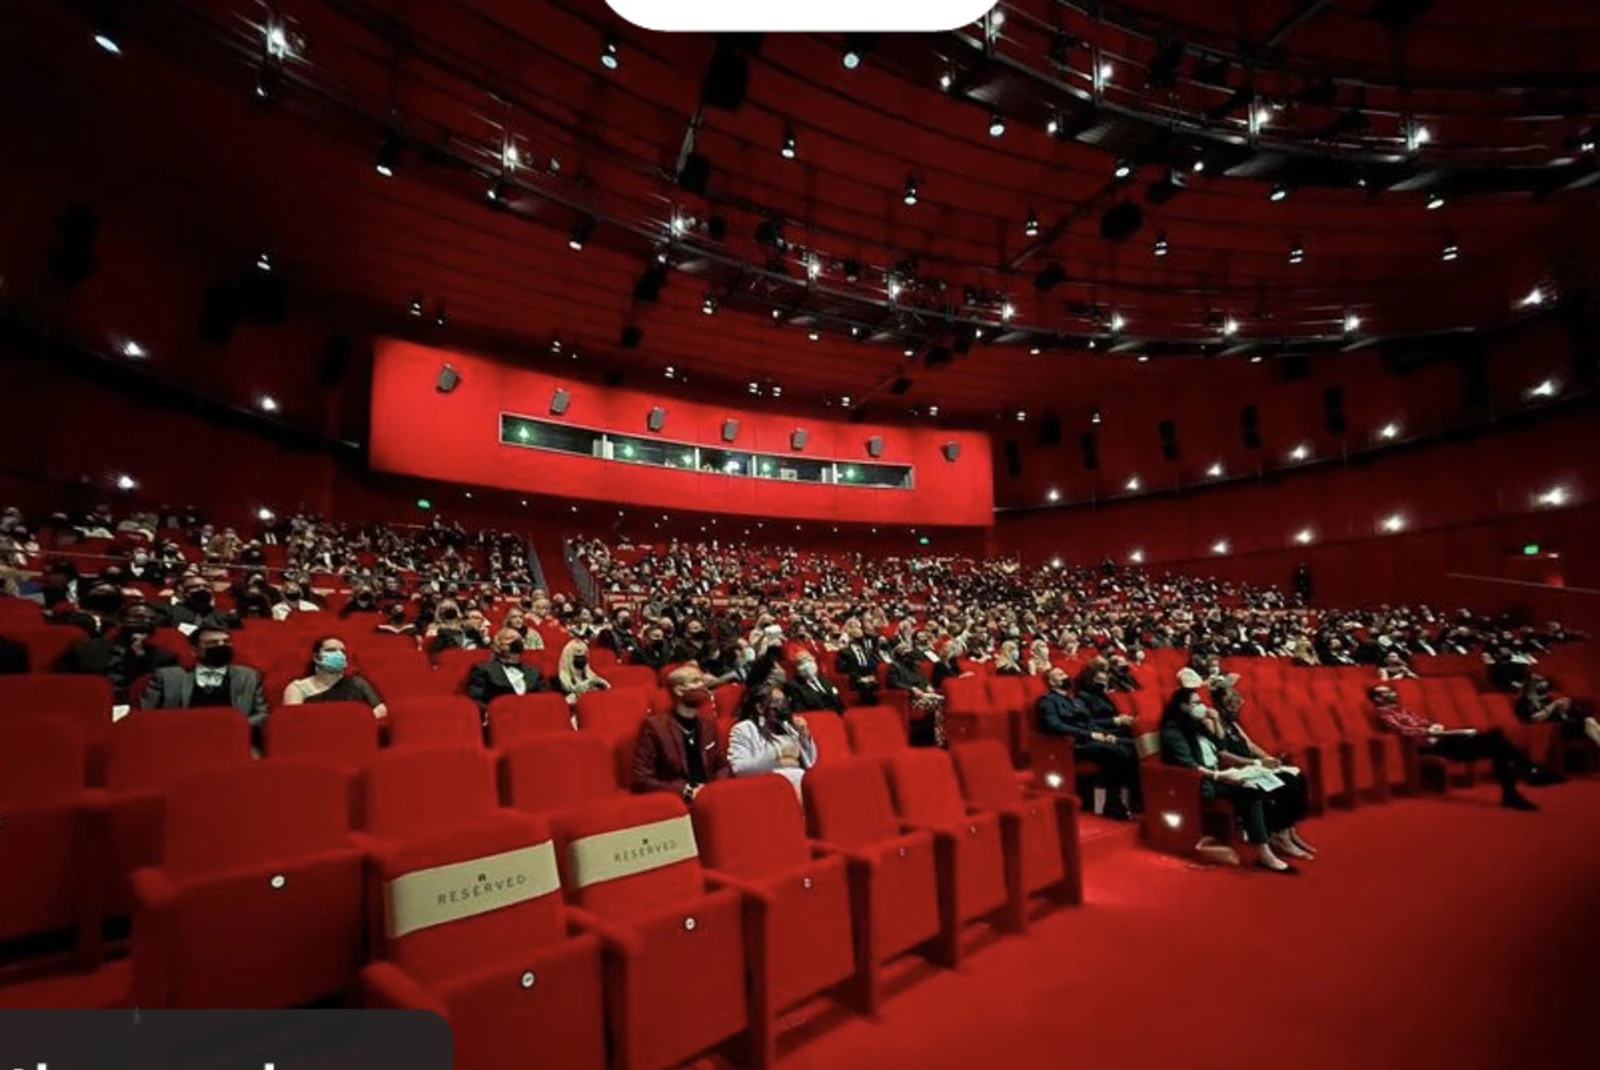 room filled with red seats and red carpet